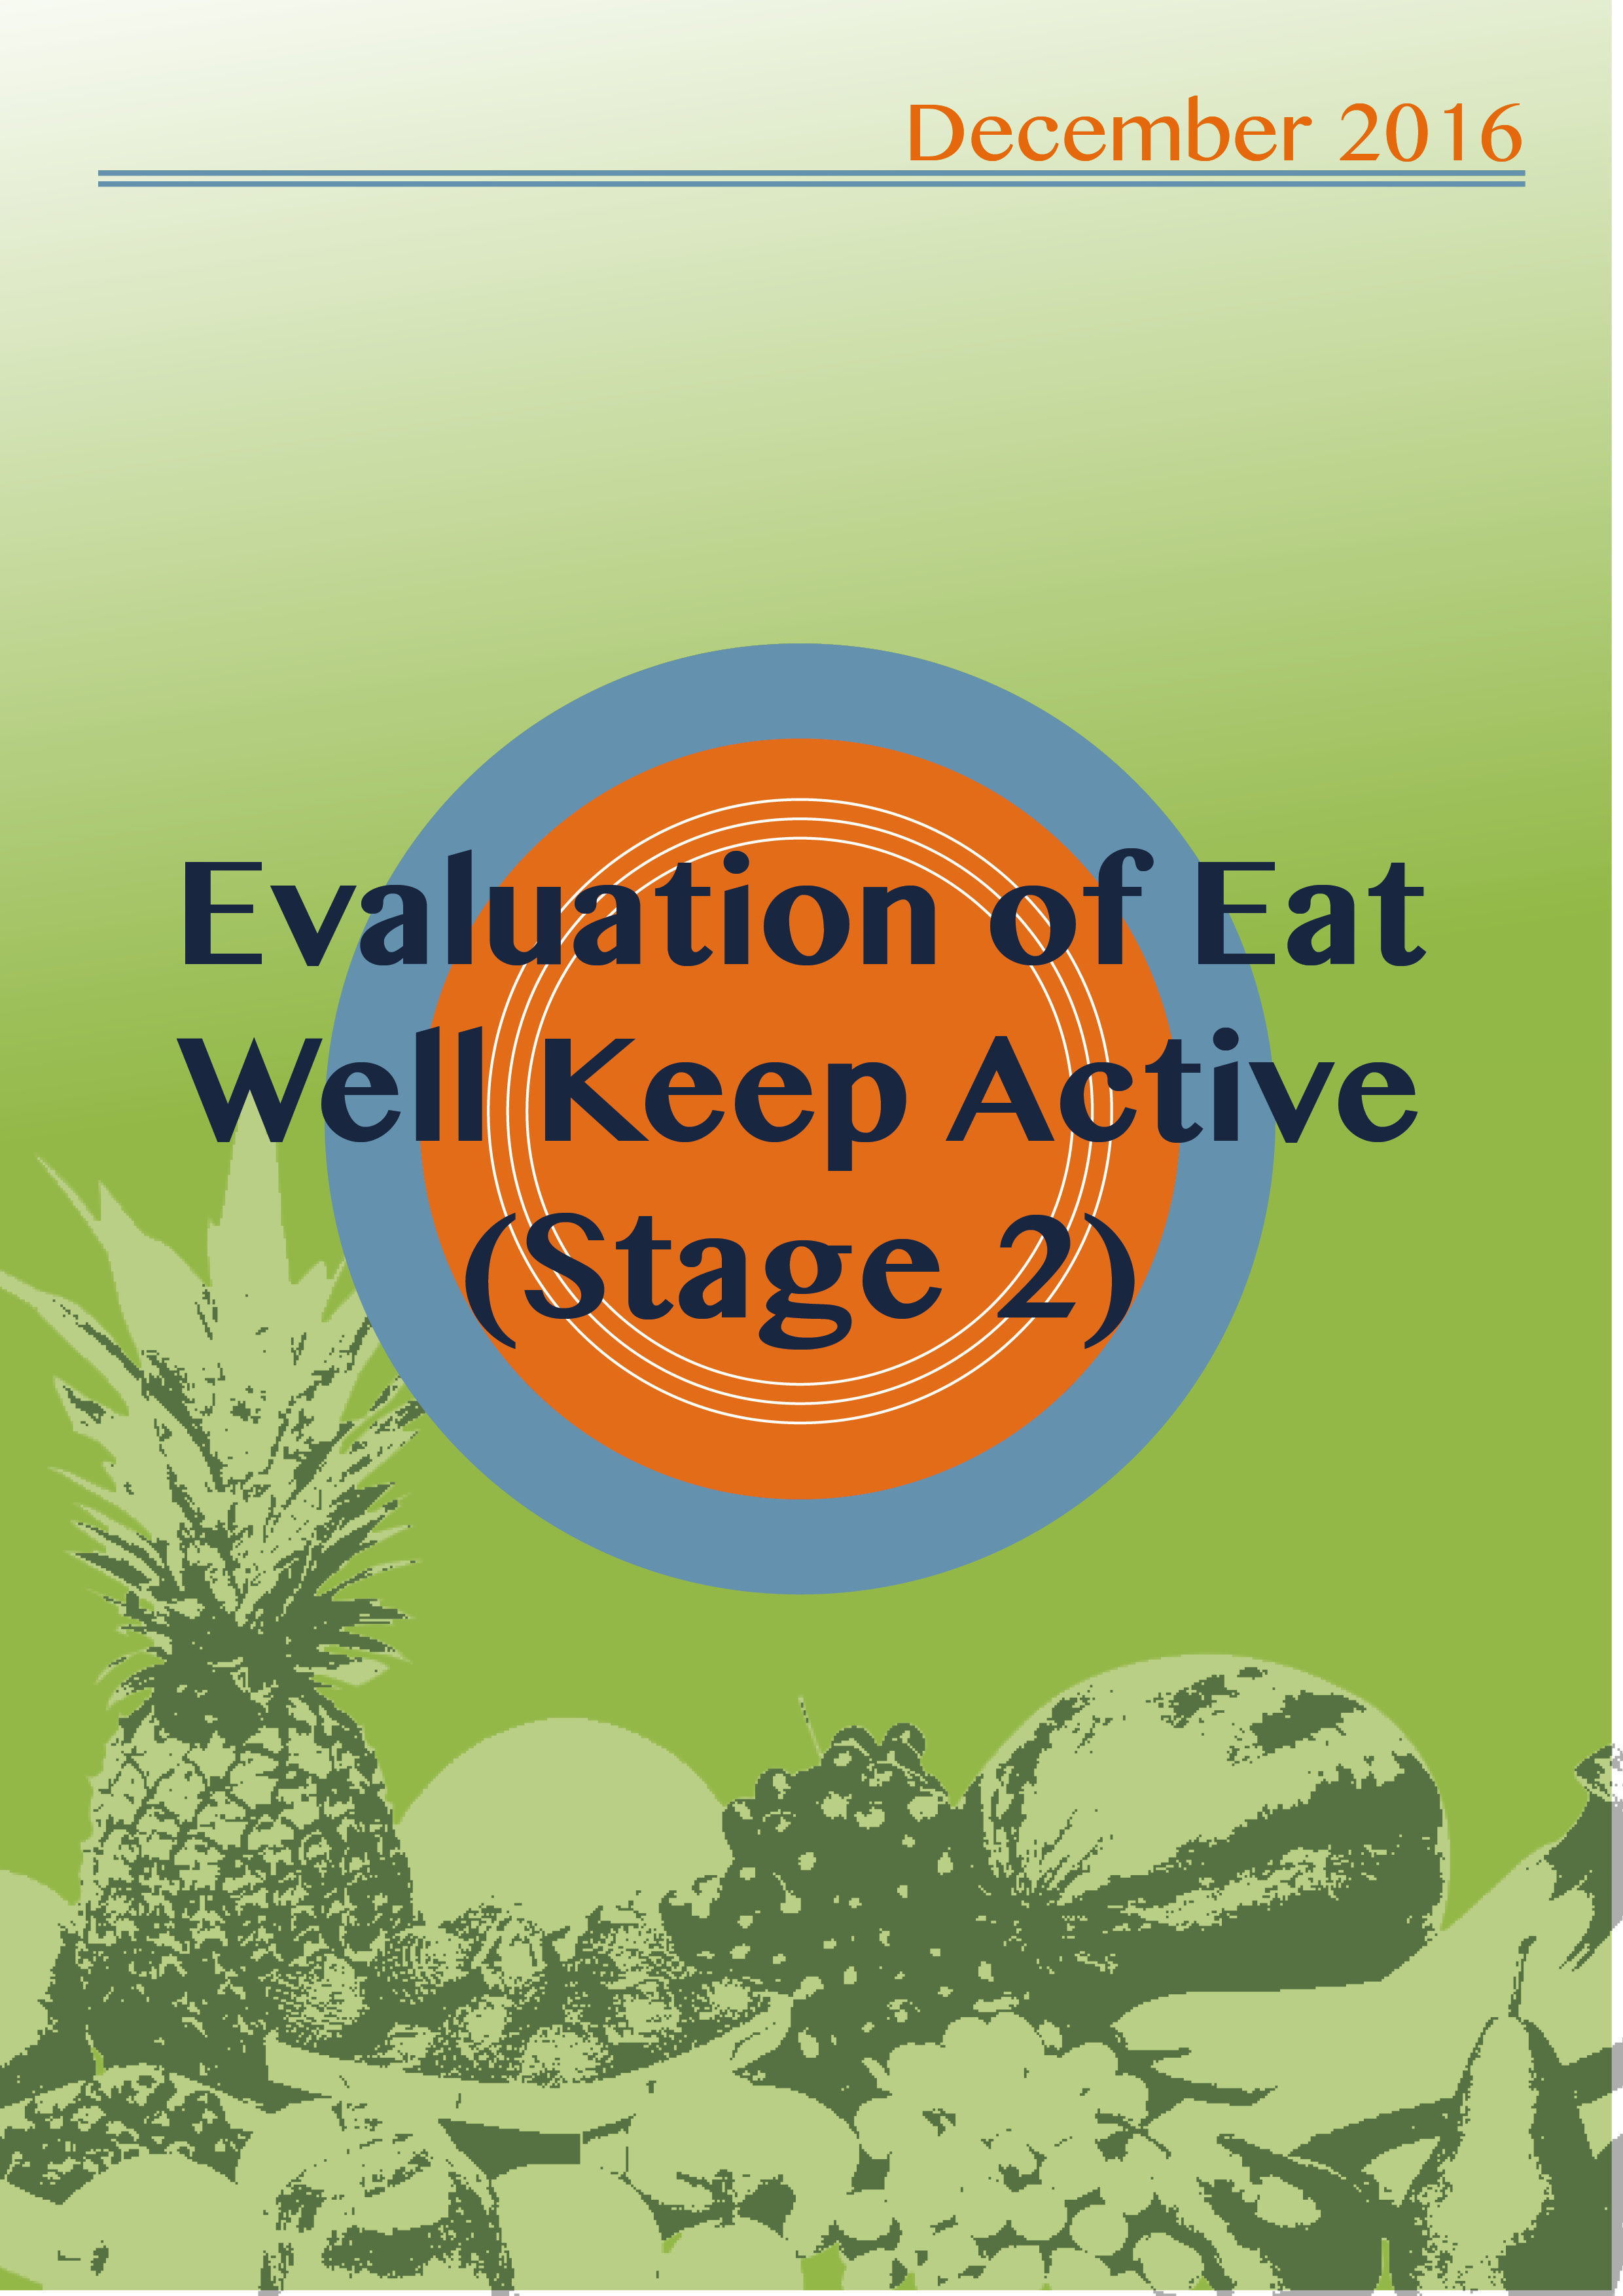 Evaluation of Eat Well Keep Active  (Stage 2)